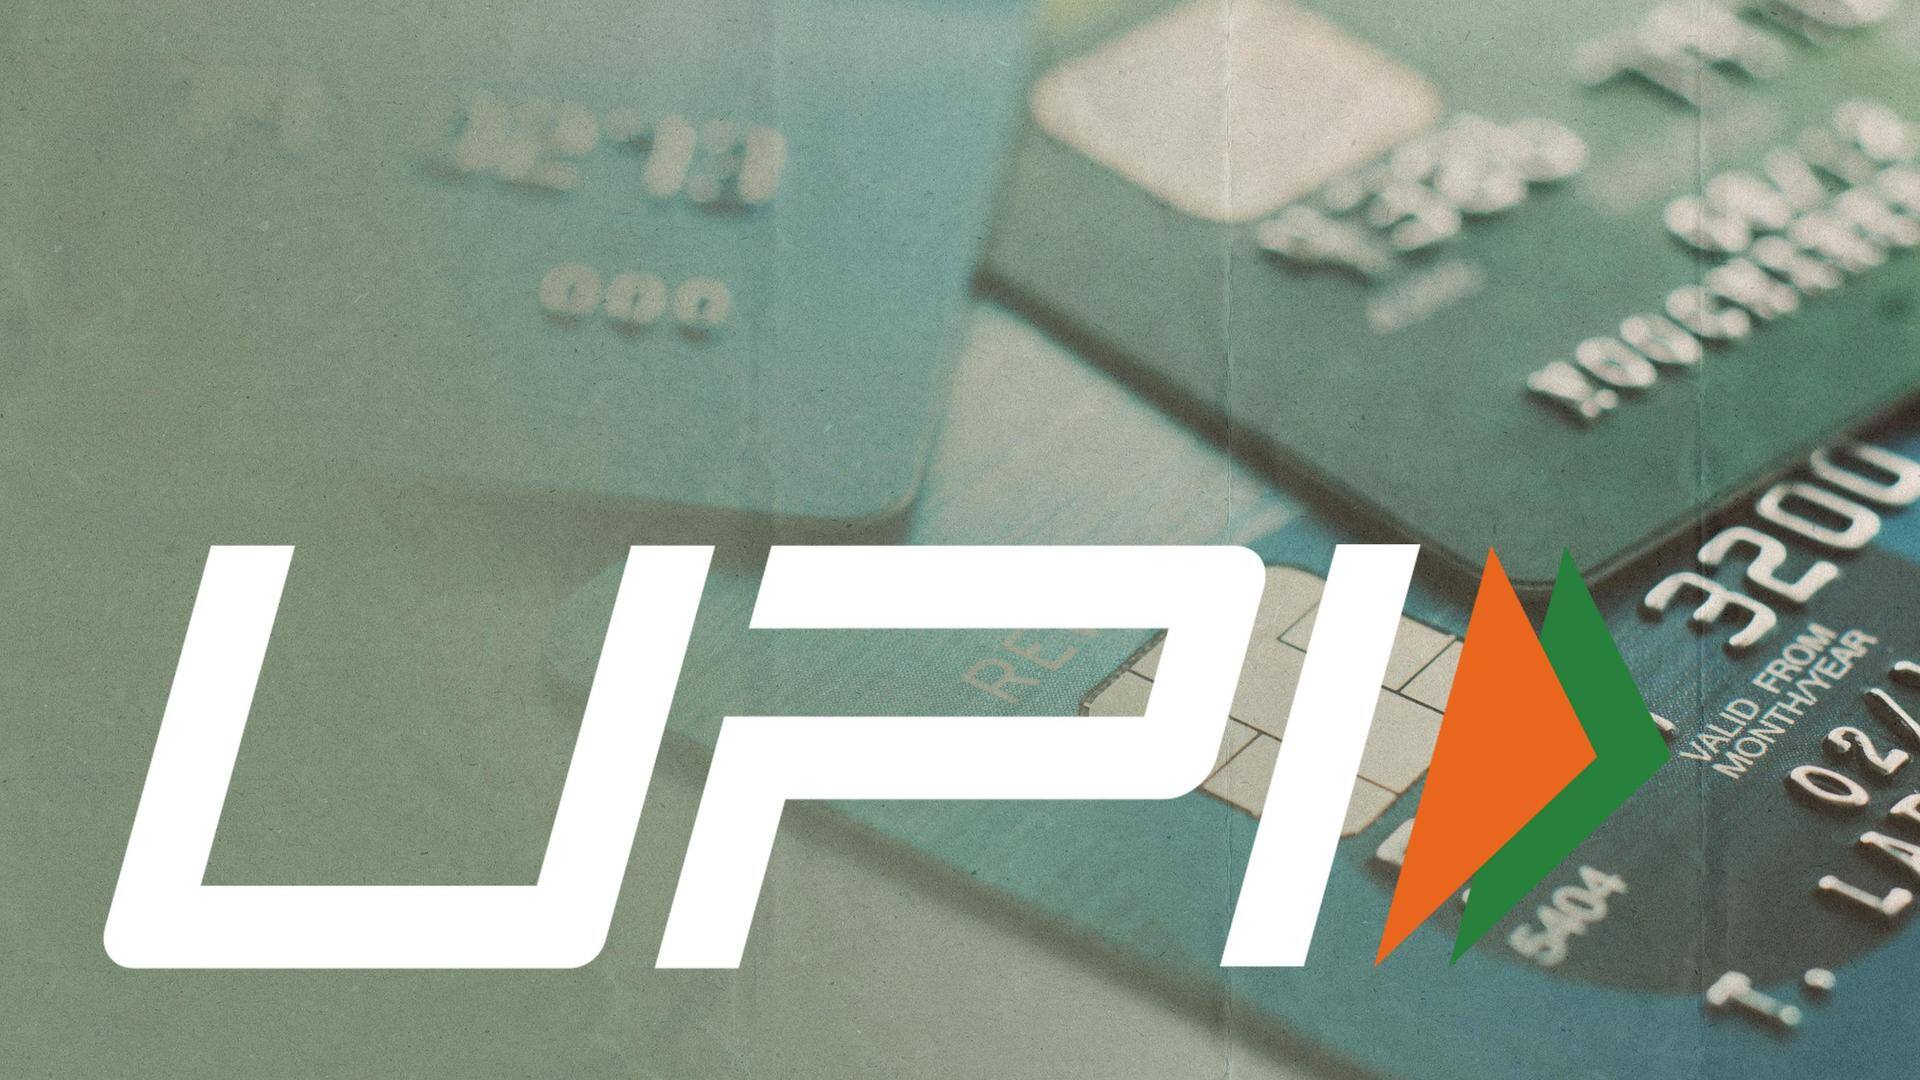 Your UPI account will soon work like a credit card